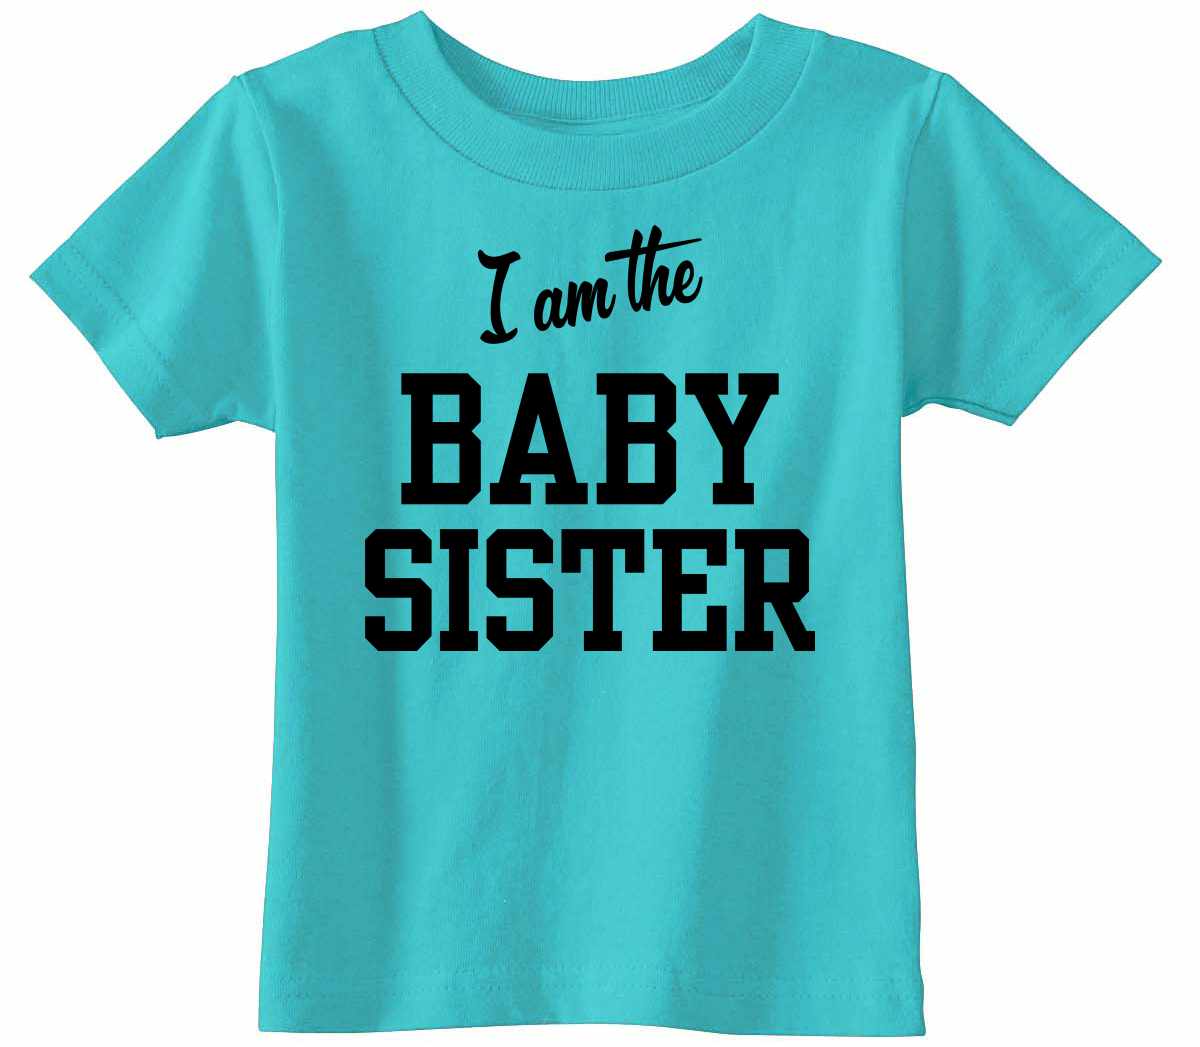 I am the Baby Sister on Infant-Toddler T-Shirt (#1292-7)